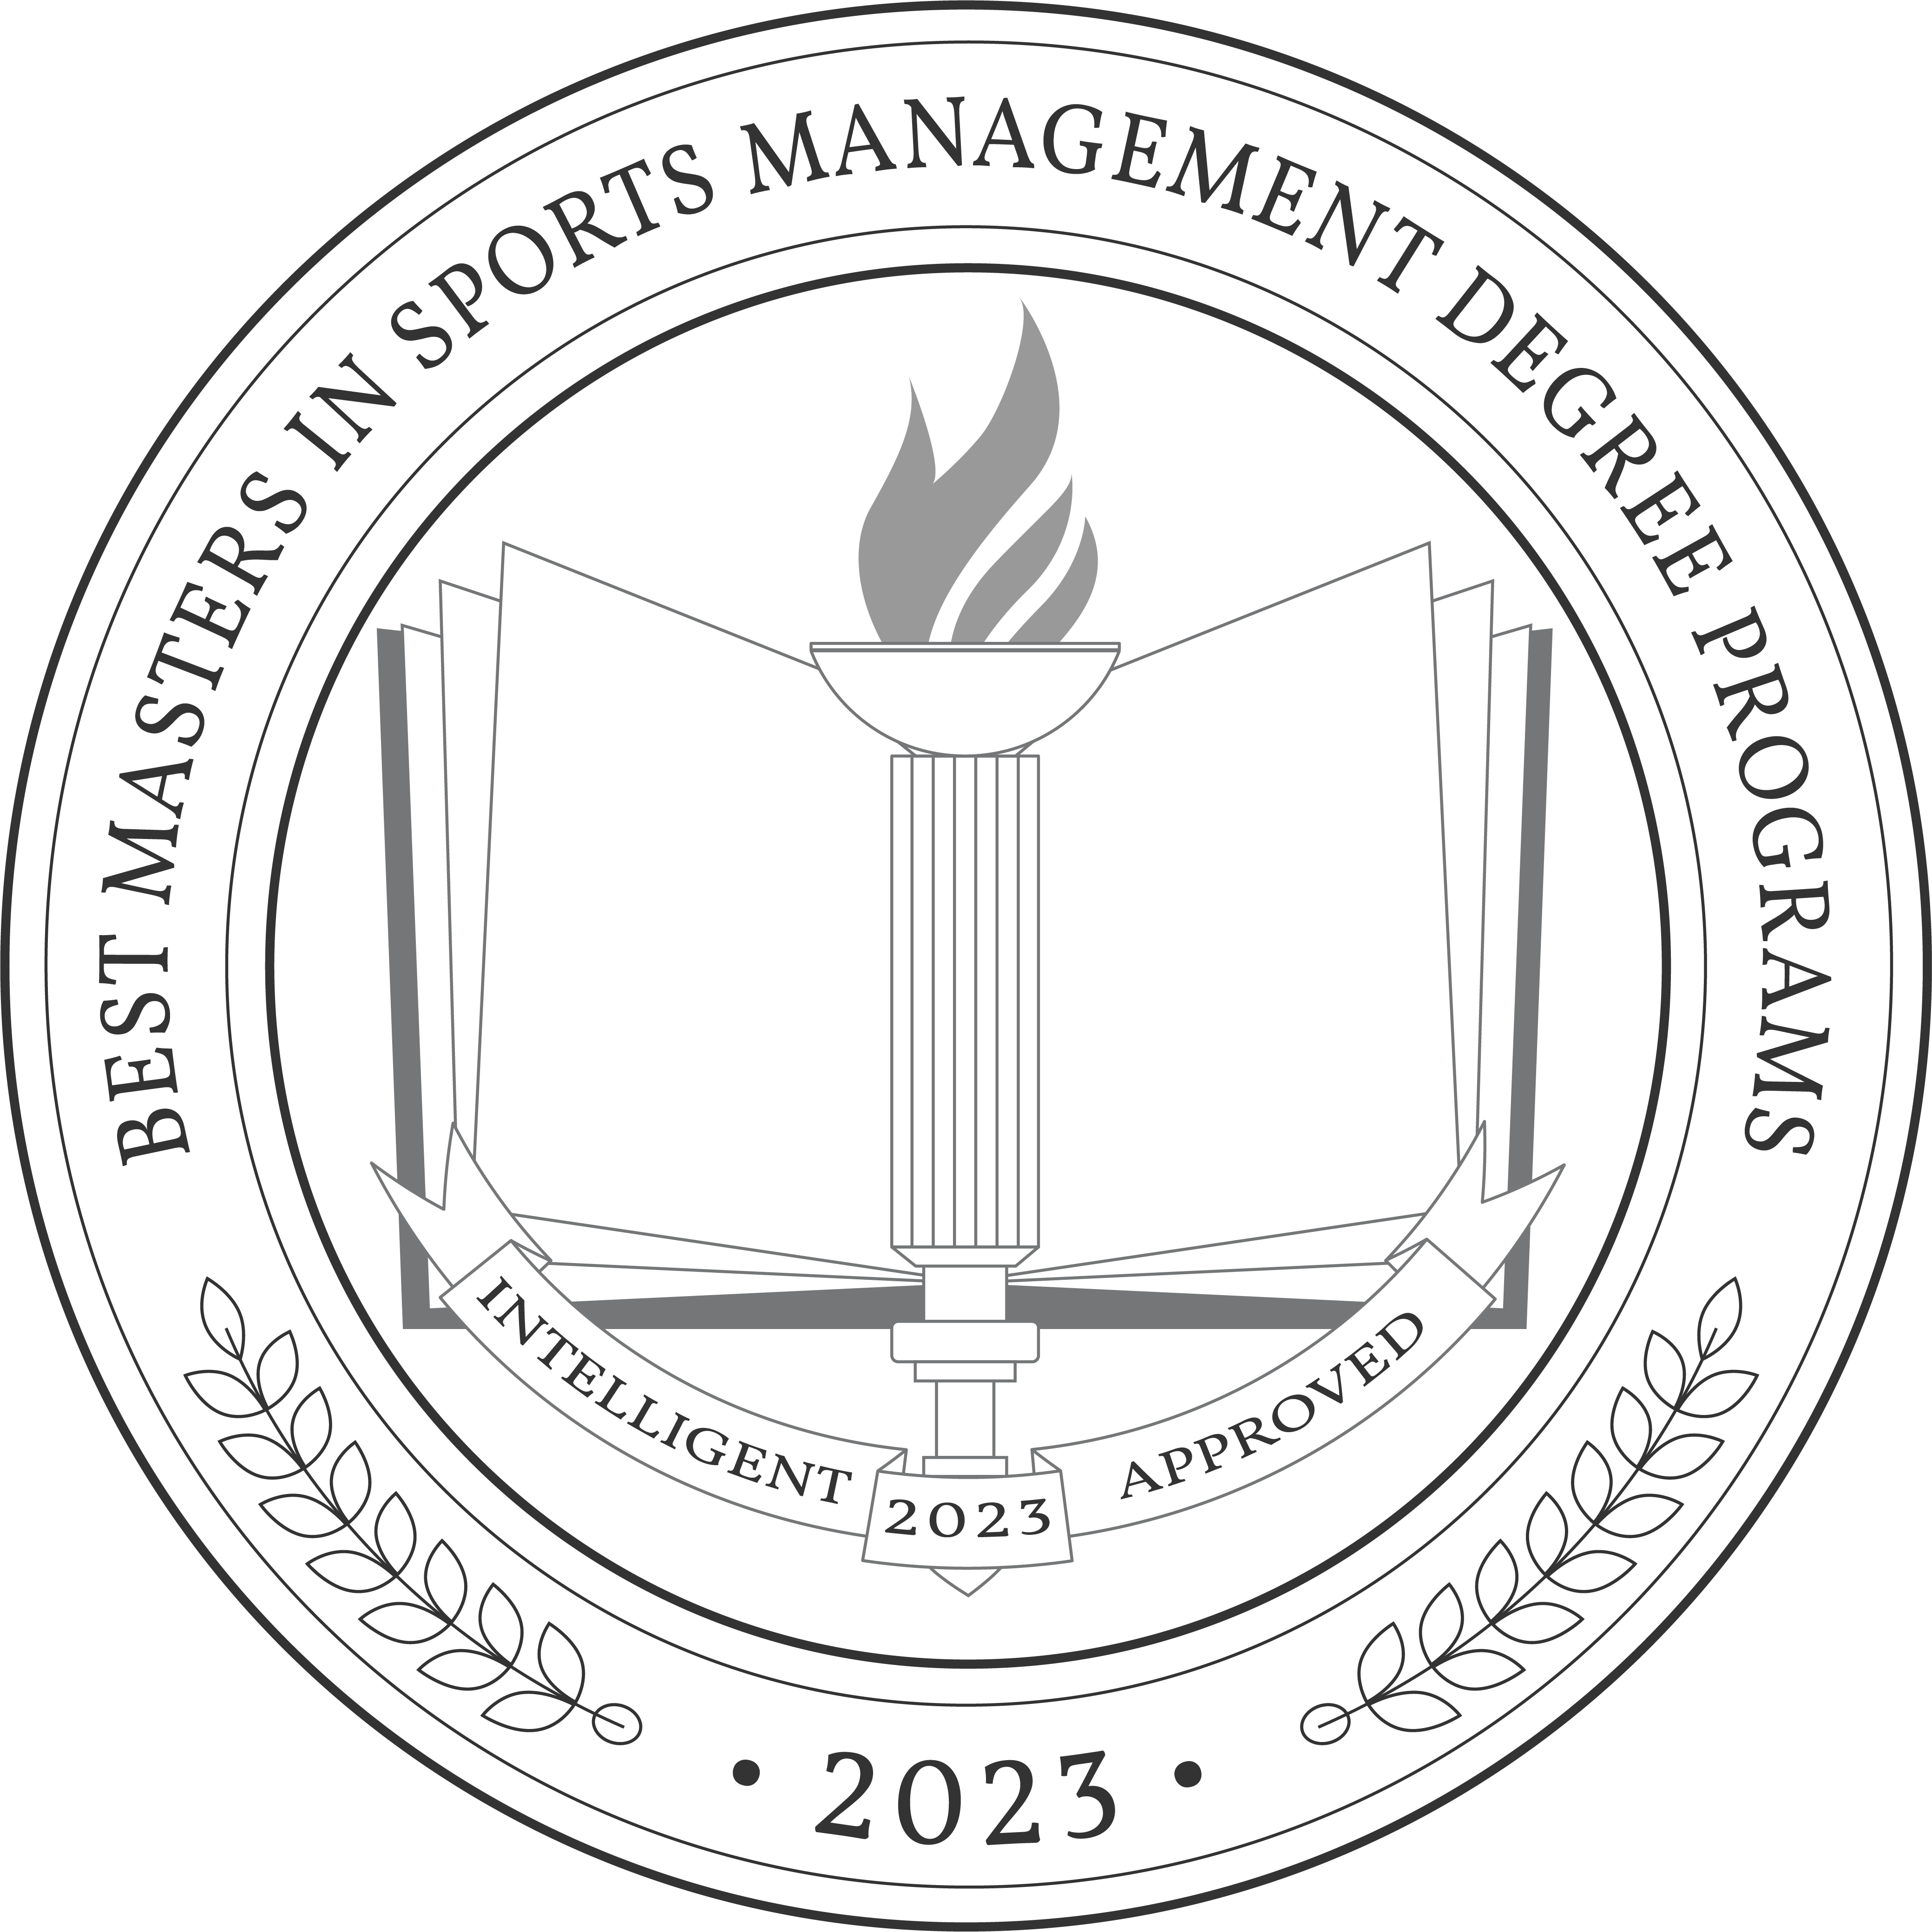 Best Master’s in Sports Management Degree Programs 2023